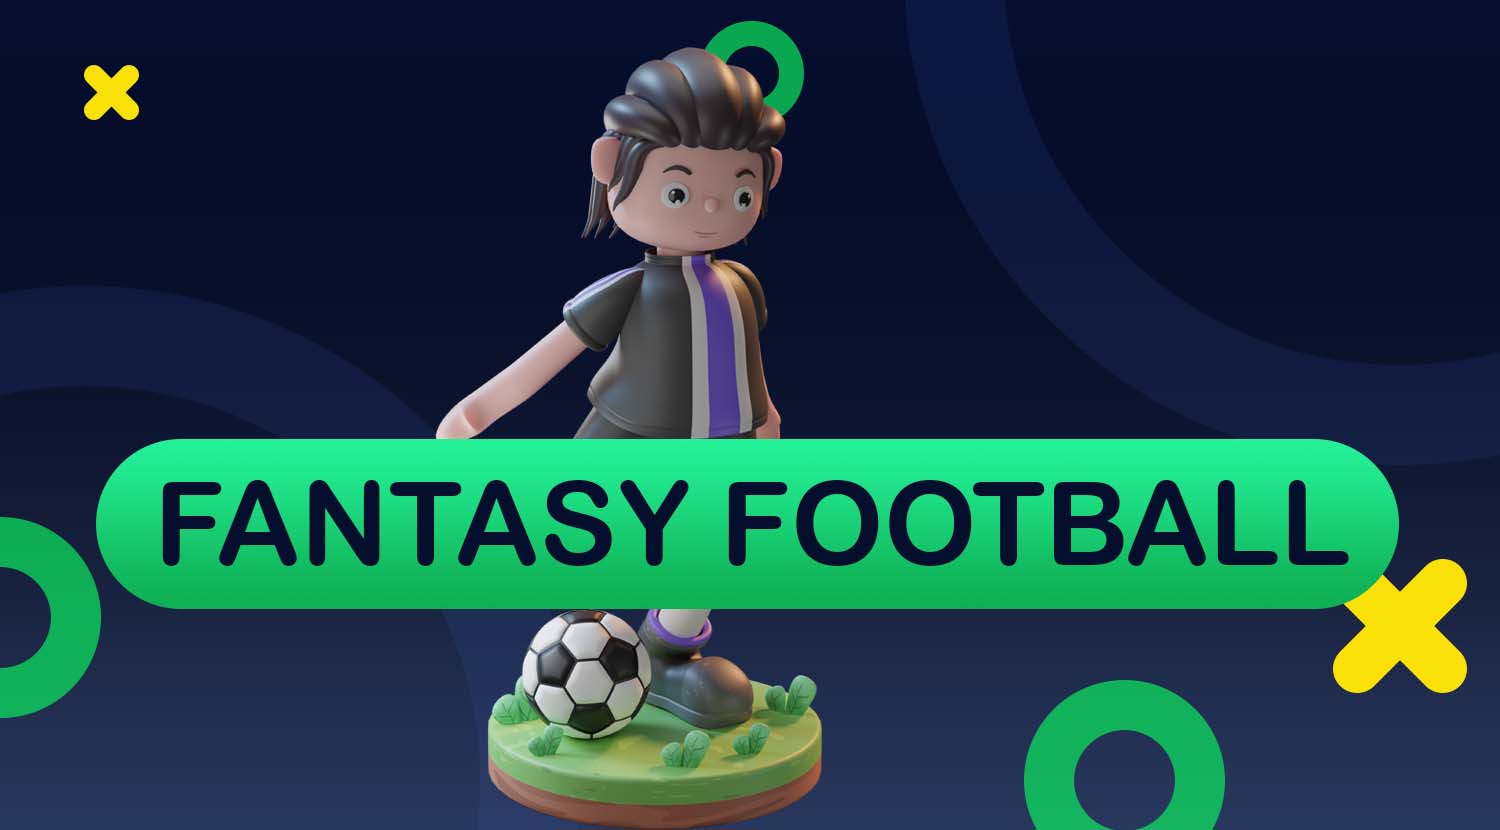 The most exating facts about fantasy football.